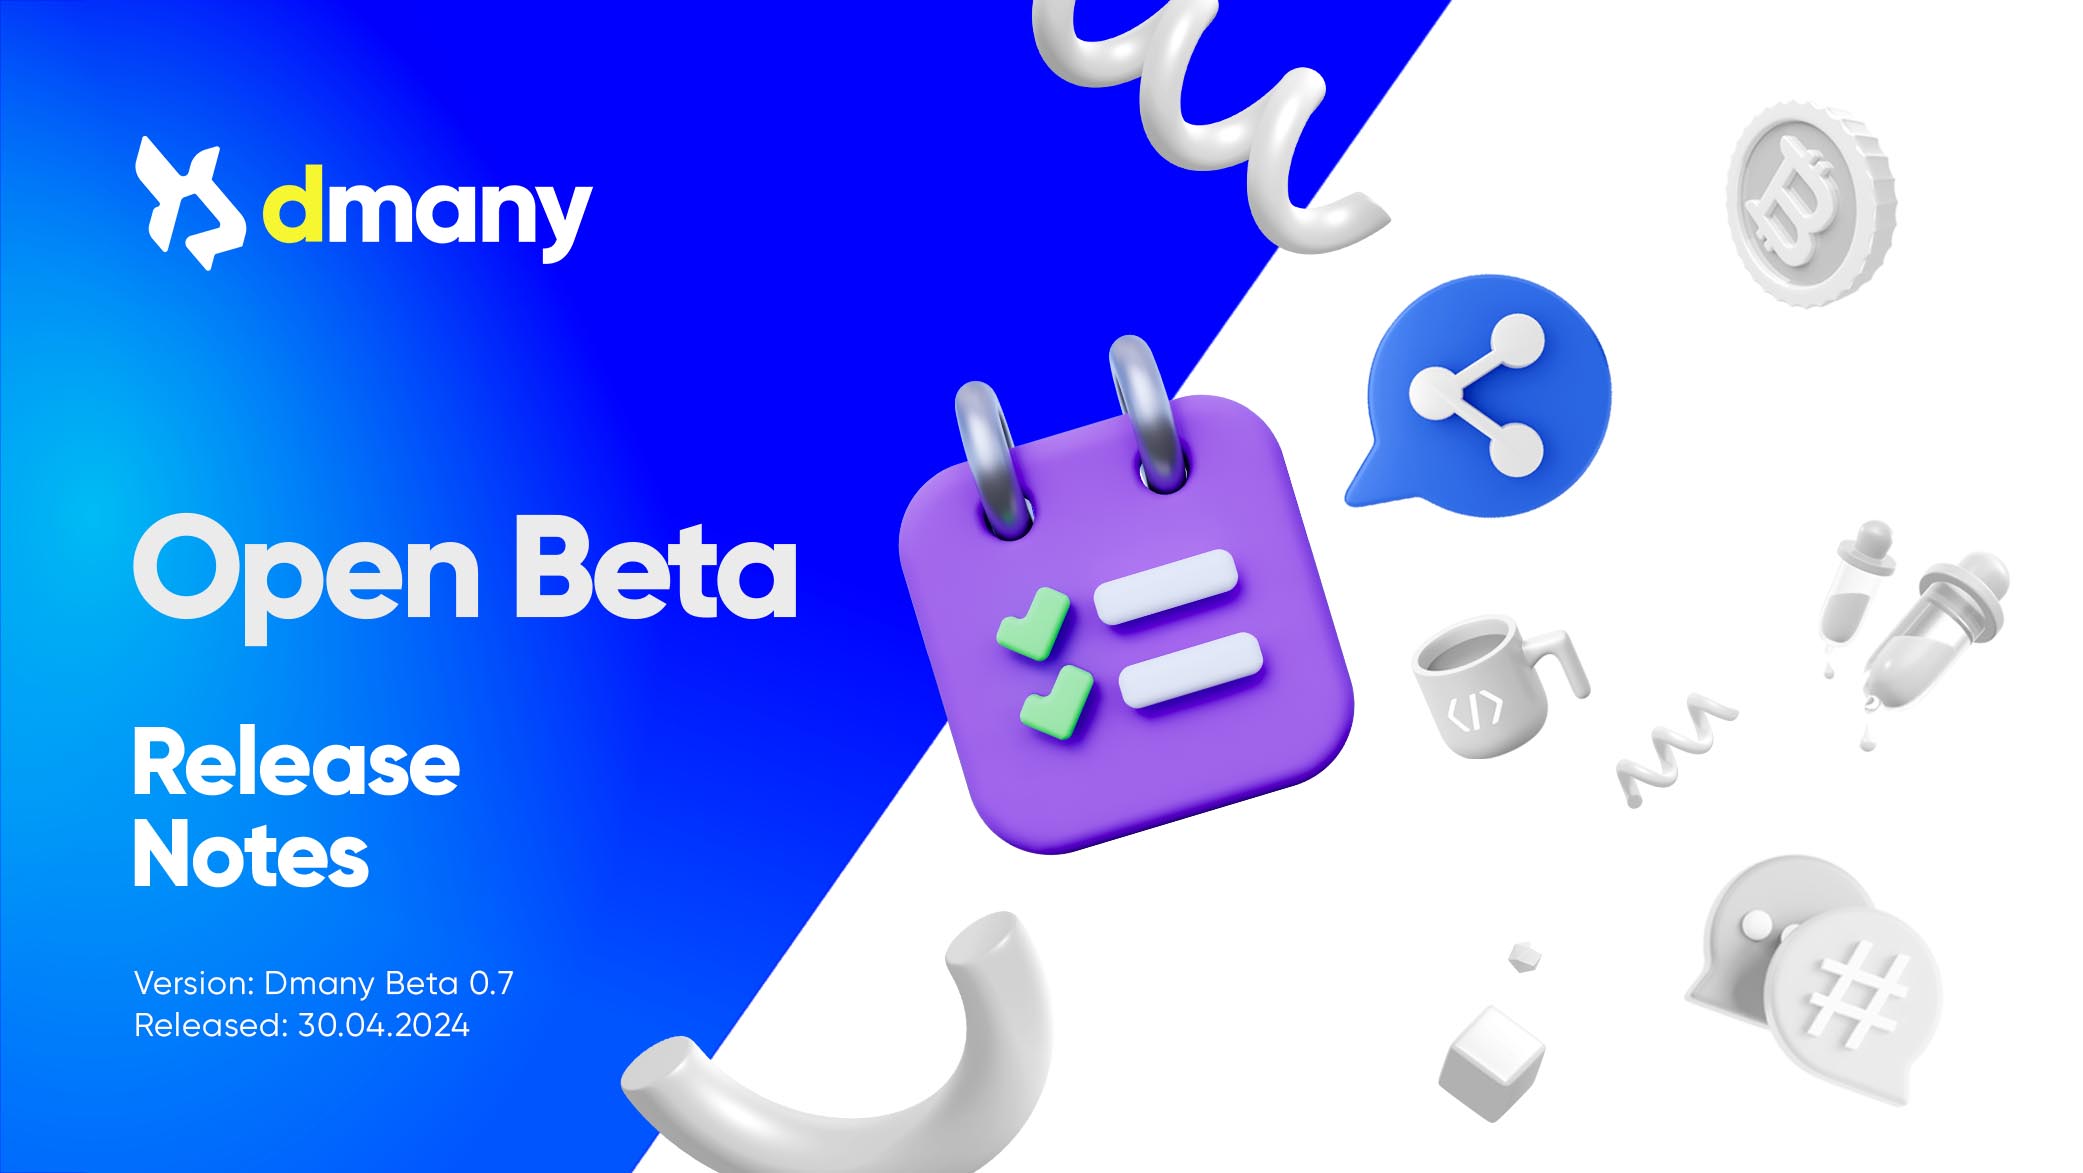 Dmany beta 0.7 – Release Notes